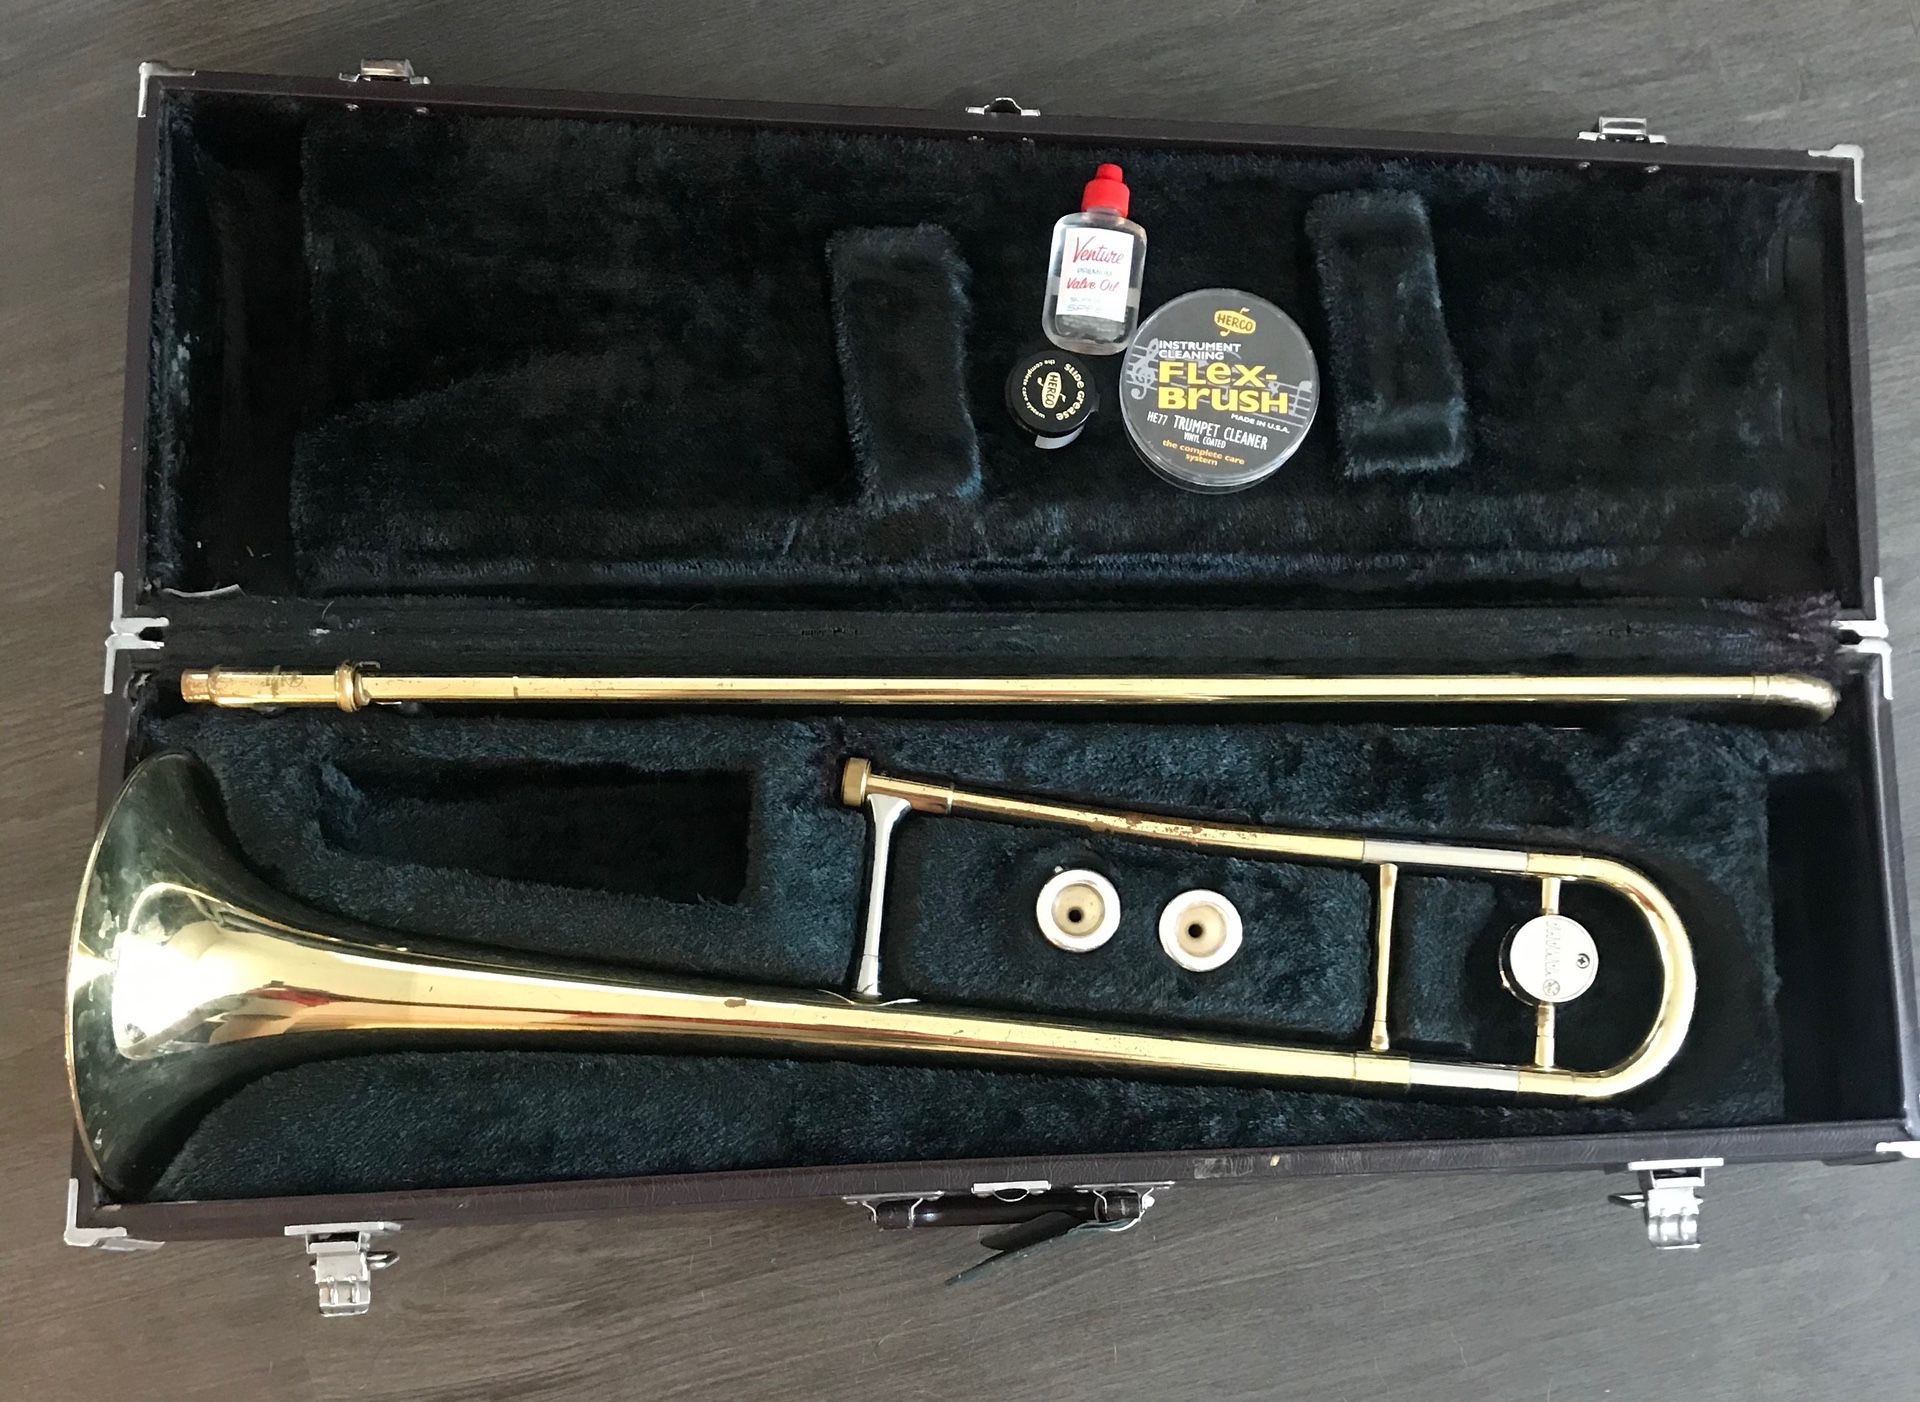 Yamaha trombone, comes with 2 mouth pieces,brush and oil/lube